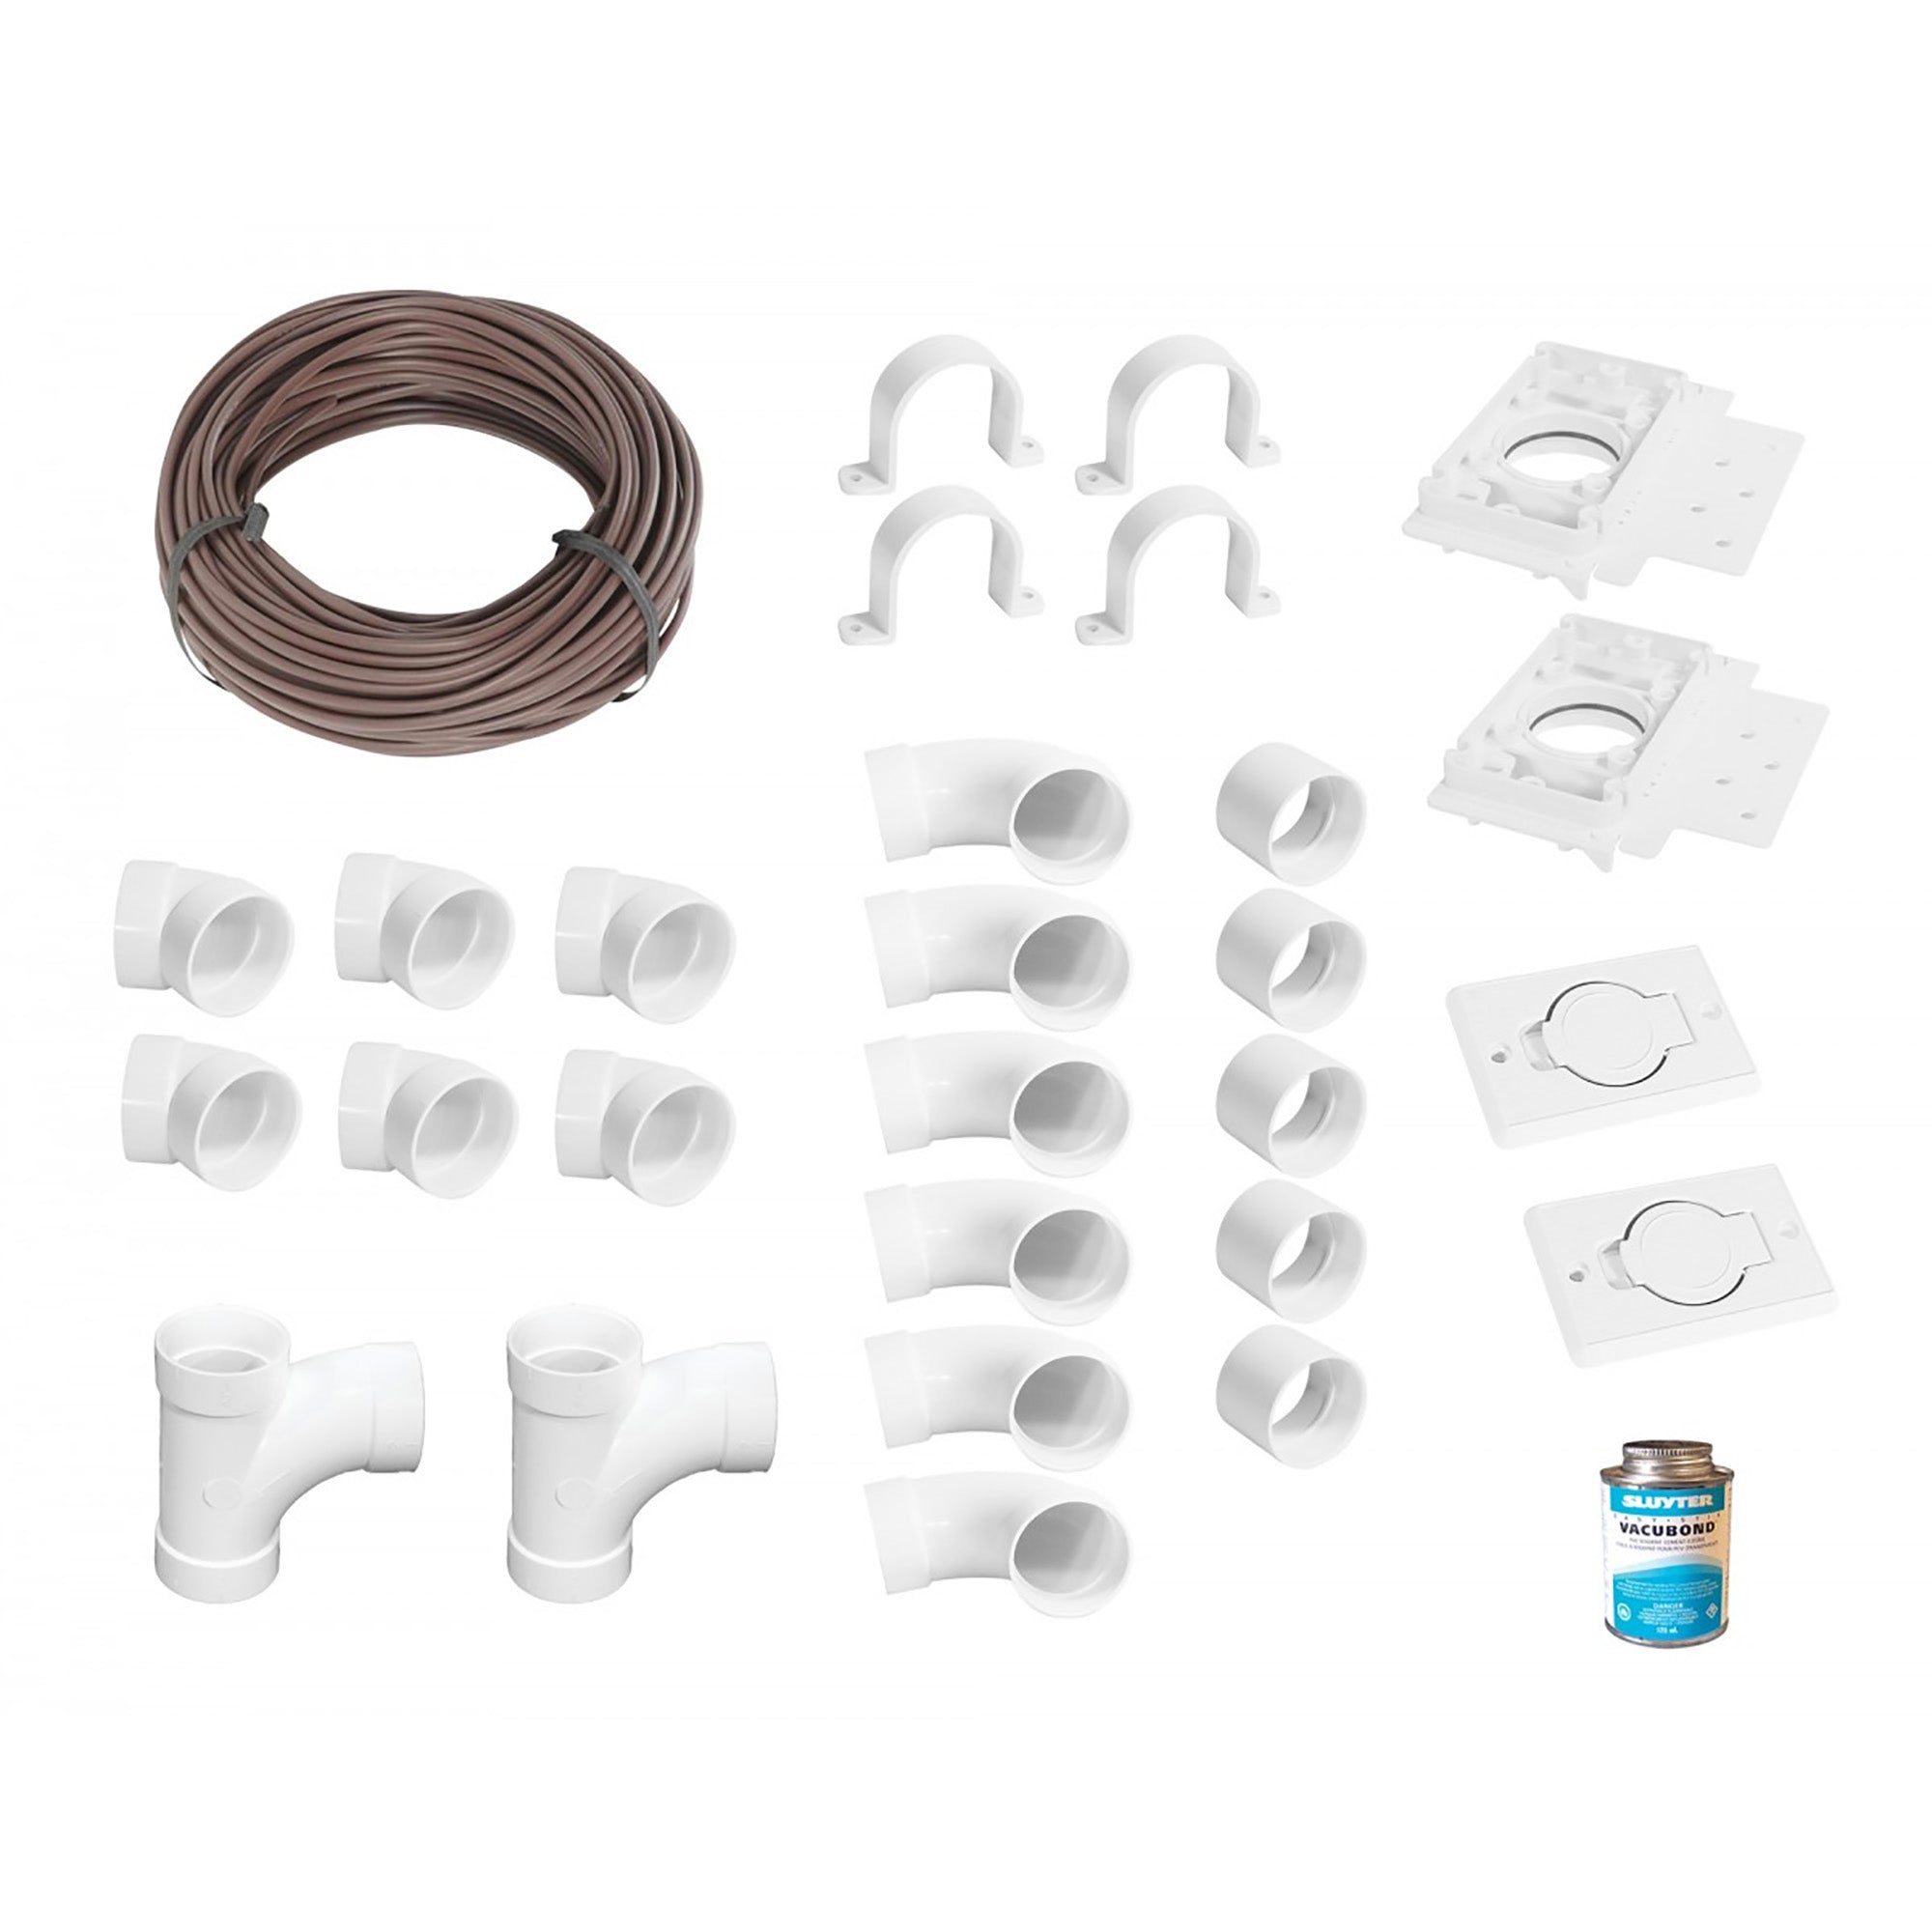 Central Vacuum Installation Kit with 2 Outlets and Accessories